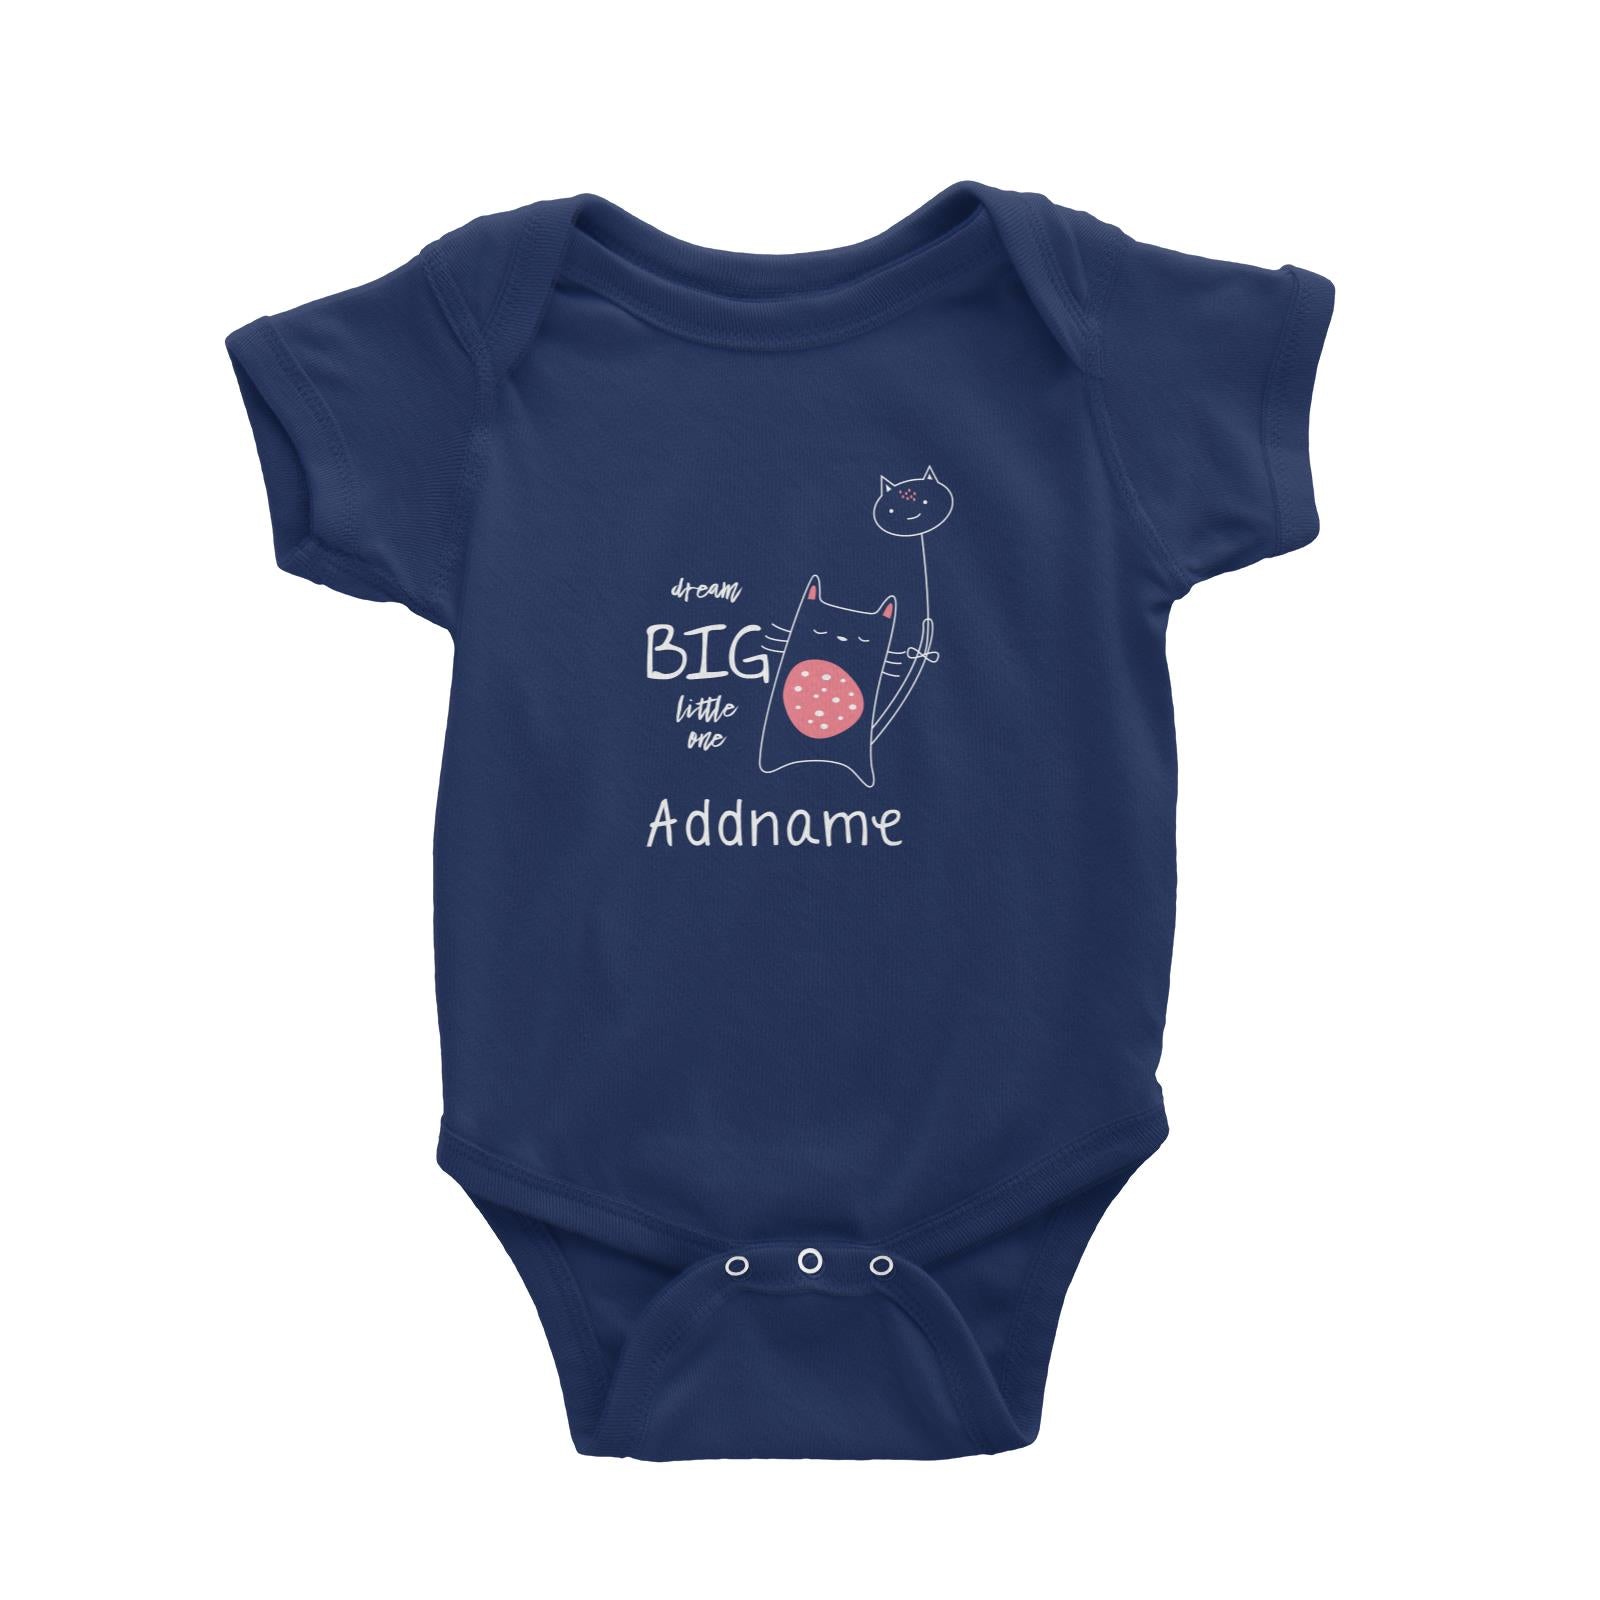 Cute Animals and Friends Series 2 Cat Dream Big Little One Addname Baby Romper